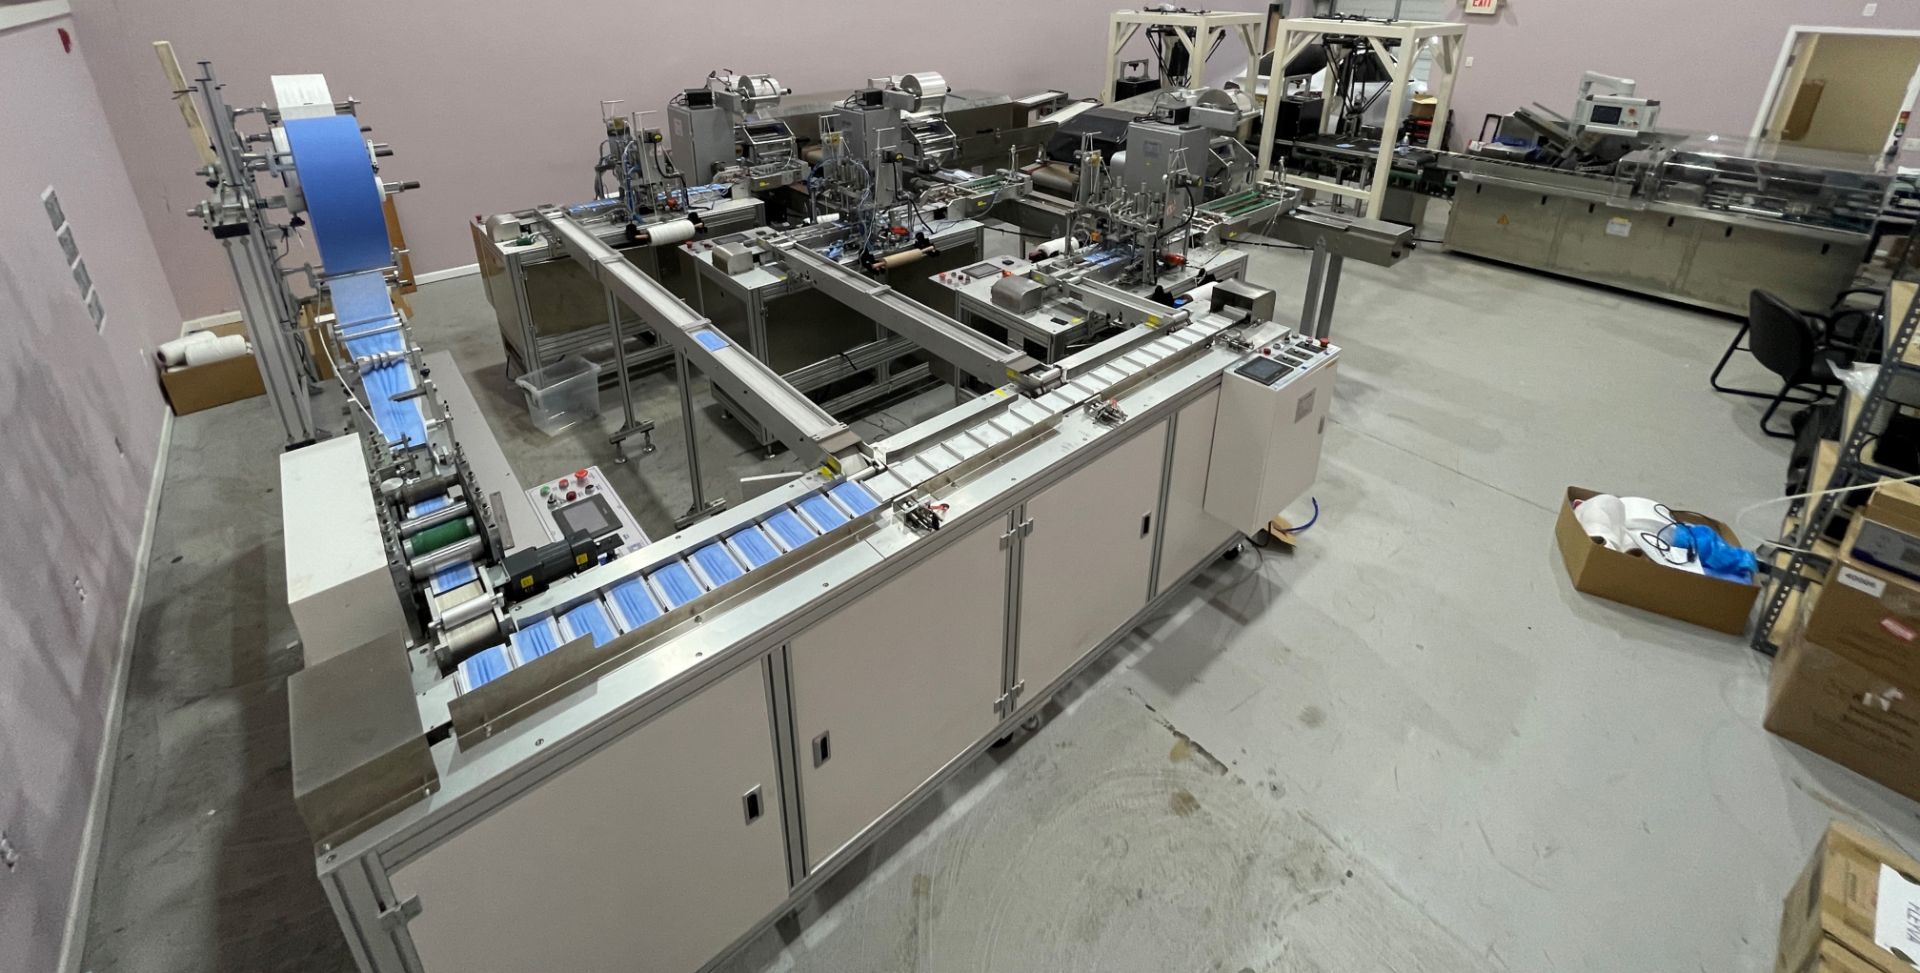 COMPLETE PACKAGE: 2020 3-Ply Disposable Medical Mask Assembly & Packaging Line Equipment, Includes: - Image 28 of 150